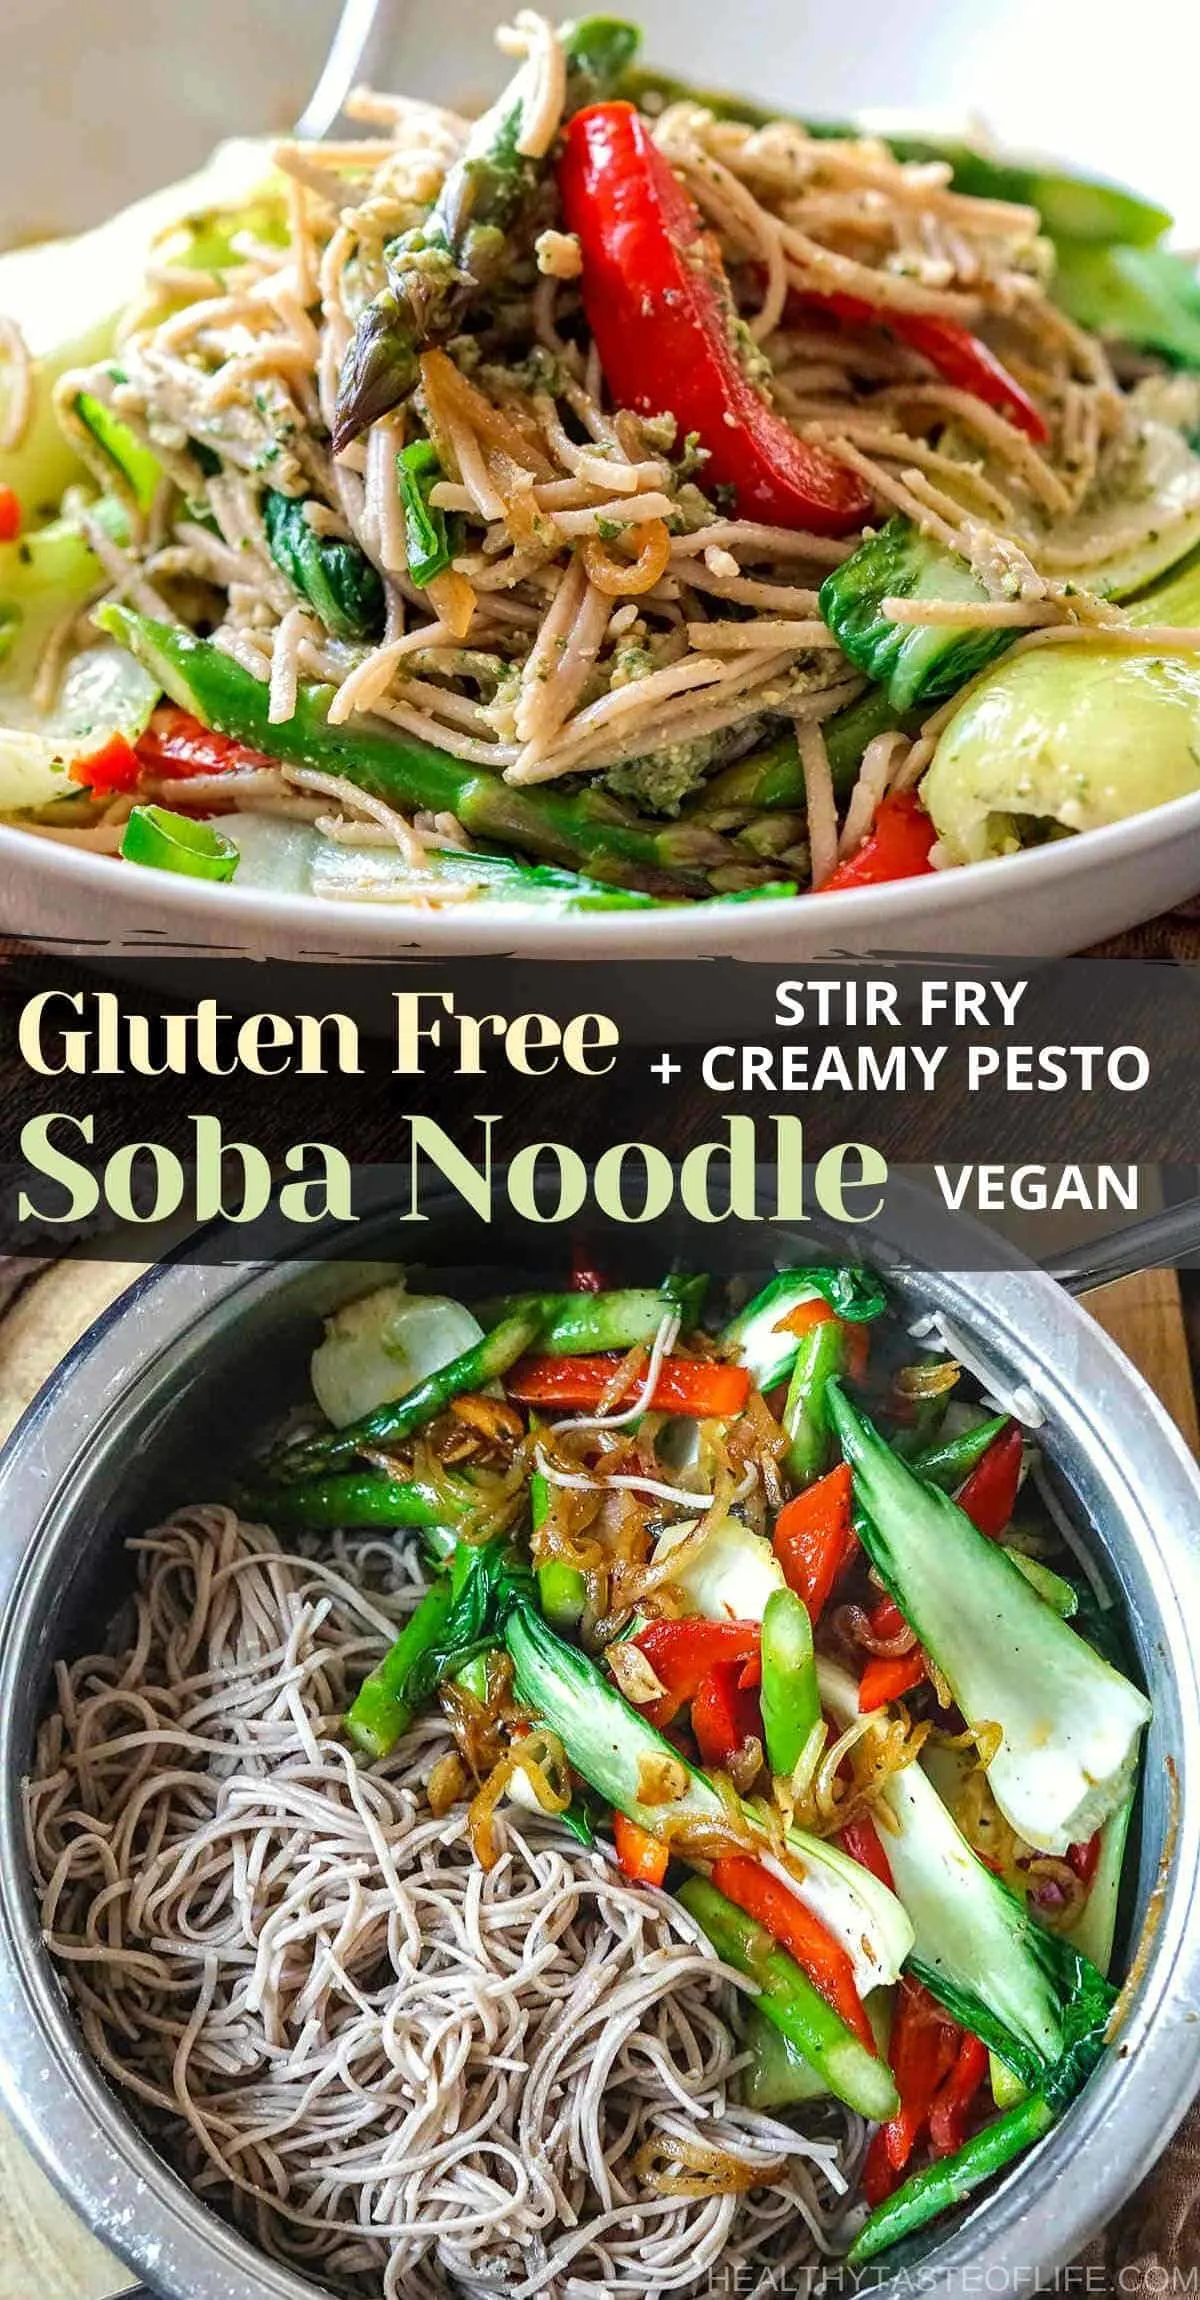 A gluten free soba noodles stir fry with basil pesto that is simple, fresh and full of flavor plus comes together in under 30 minutes. This gluten free soba noodle recipe is also dairy free and vegan friendly. The combination of buckwheat taste of the soba noodle, the creaminess of basil pesto and the crunch of stir fried veggies like bok choy and asparagus makes a delicious week night dish. #sobanoodles #glutenfree #vegan #mainmeal #sobastirfry #buckwheatnoodles #stirfrysoba #buckwheatpasta